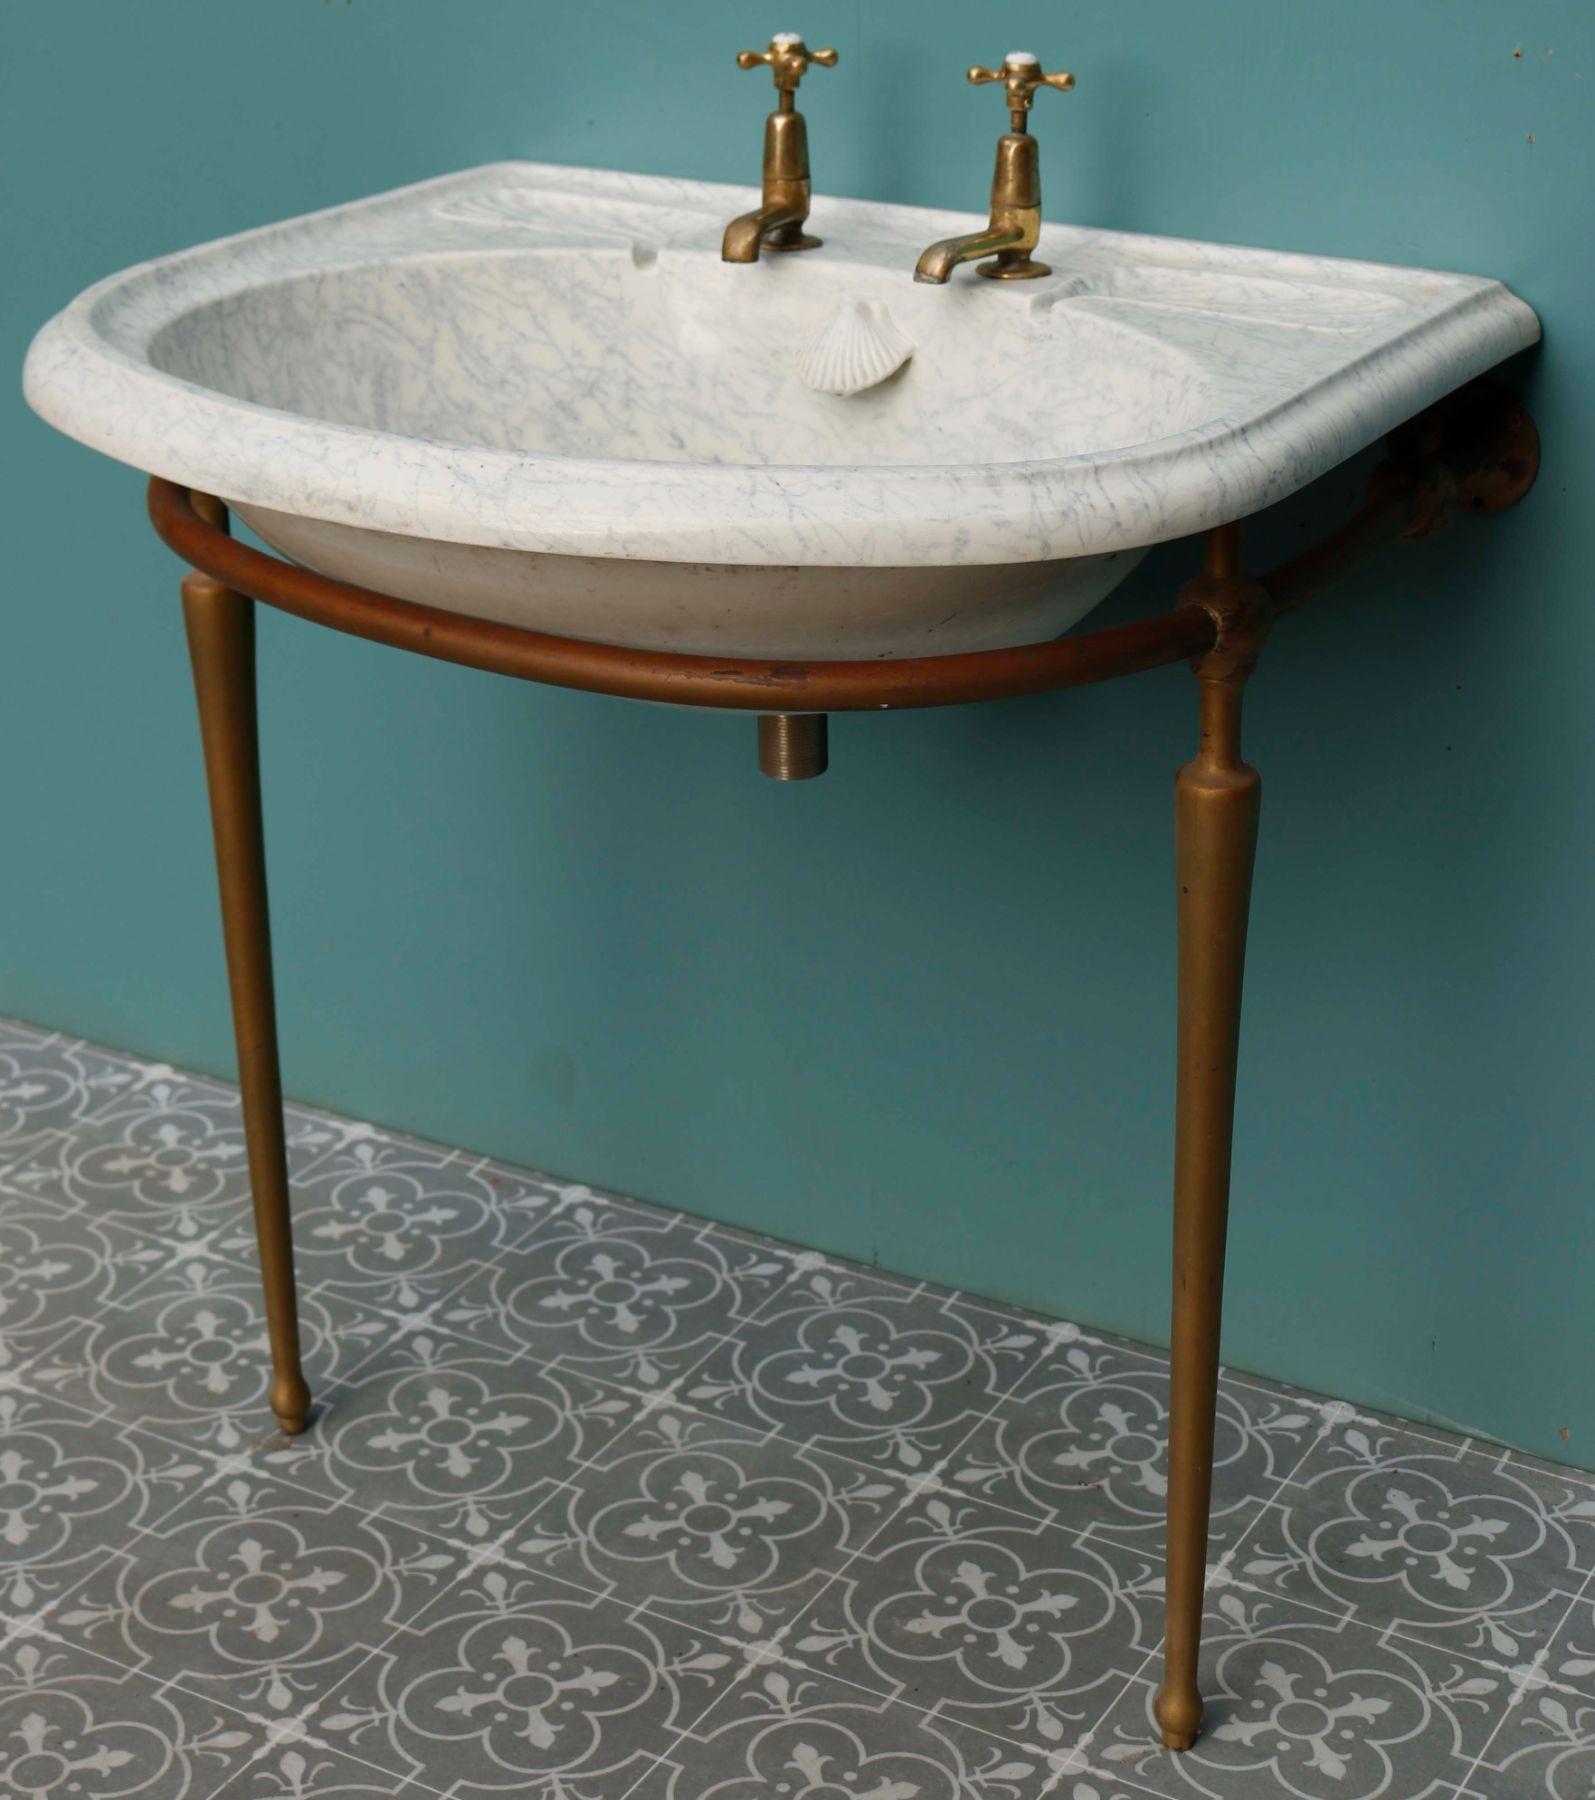 19th Century Antique Rounded Marble Effect Sink